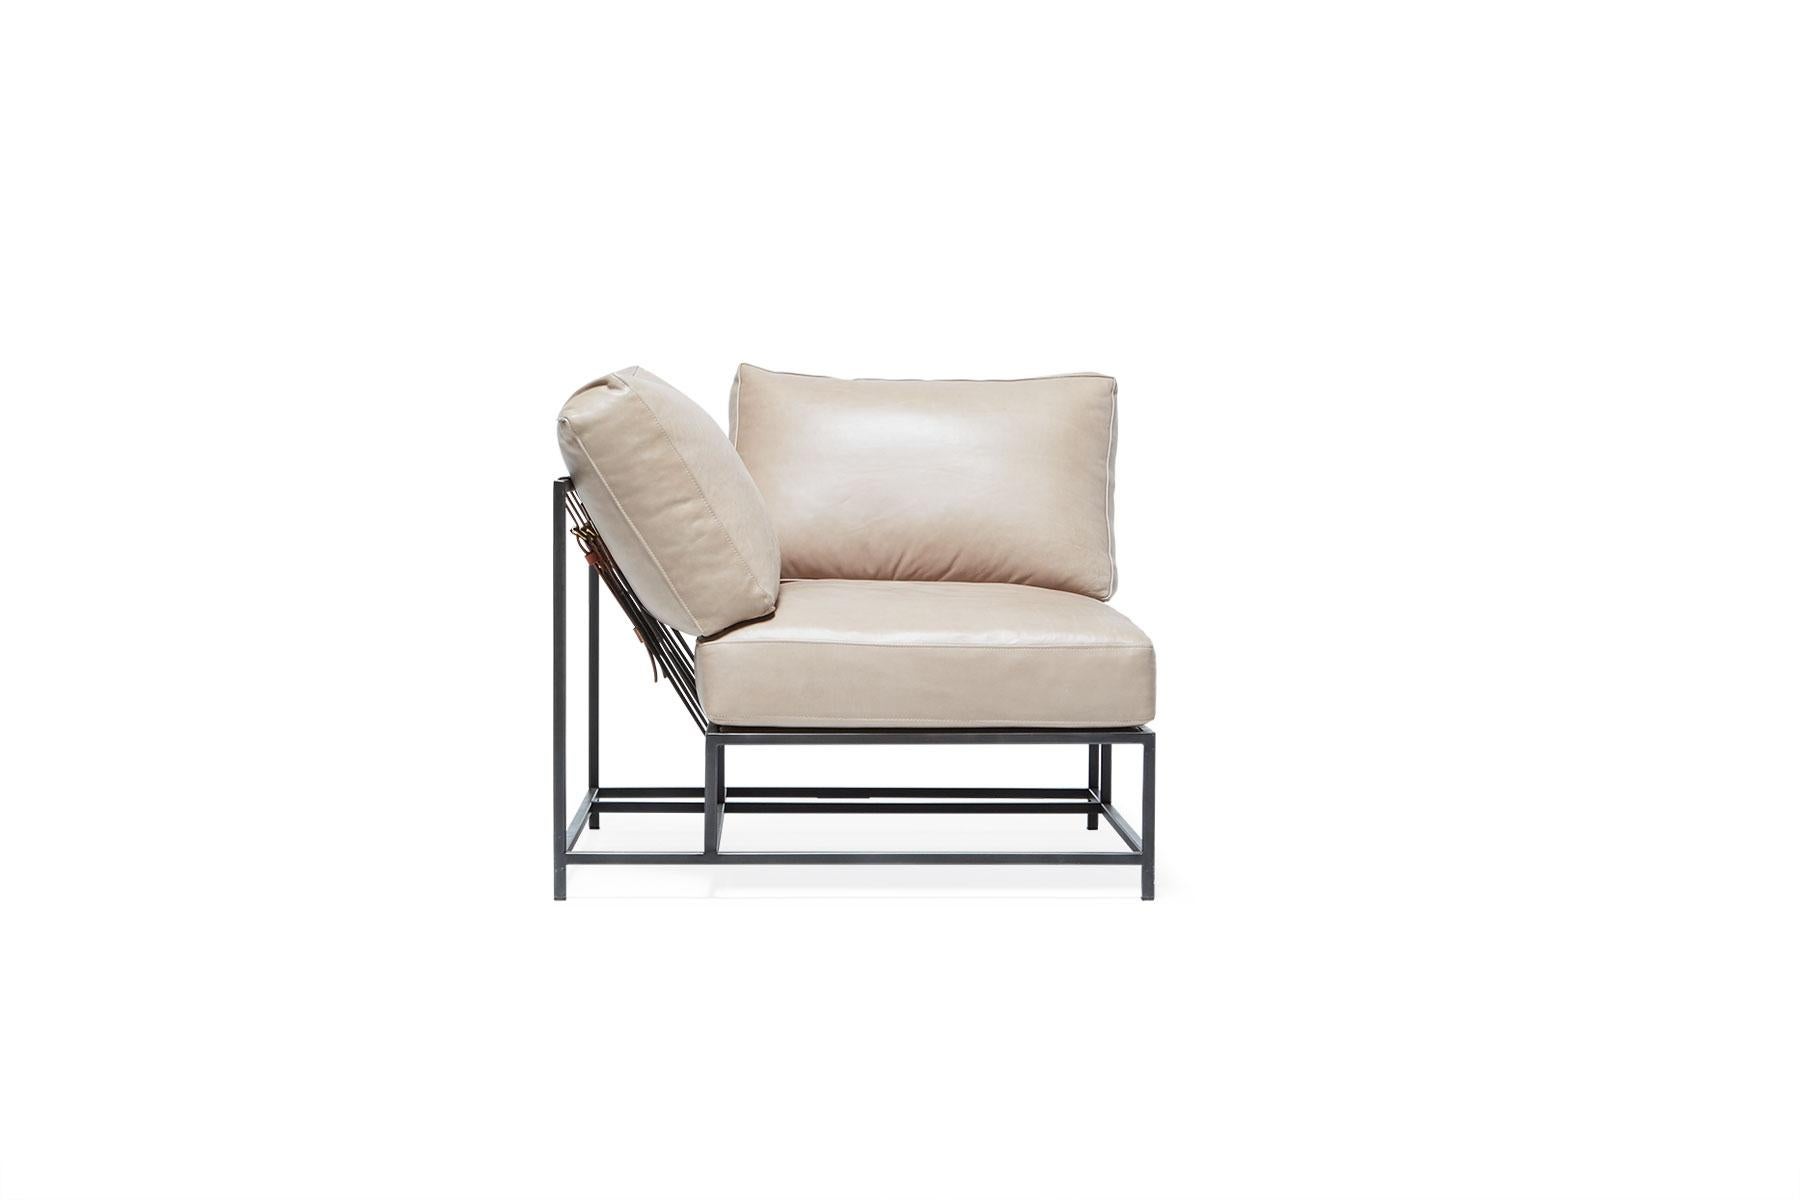 The inheritance corner chair can be used as a standalone piece, or as part of a modular sectional with other Inheritance pieces.

This variation is upholstered in a light smoke leather. The foam seat cushions have been wrapped in down, allowing